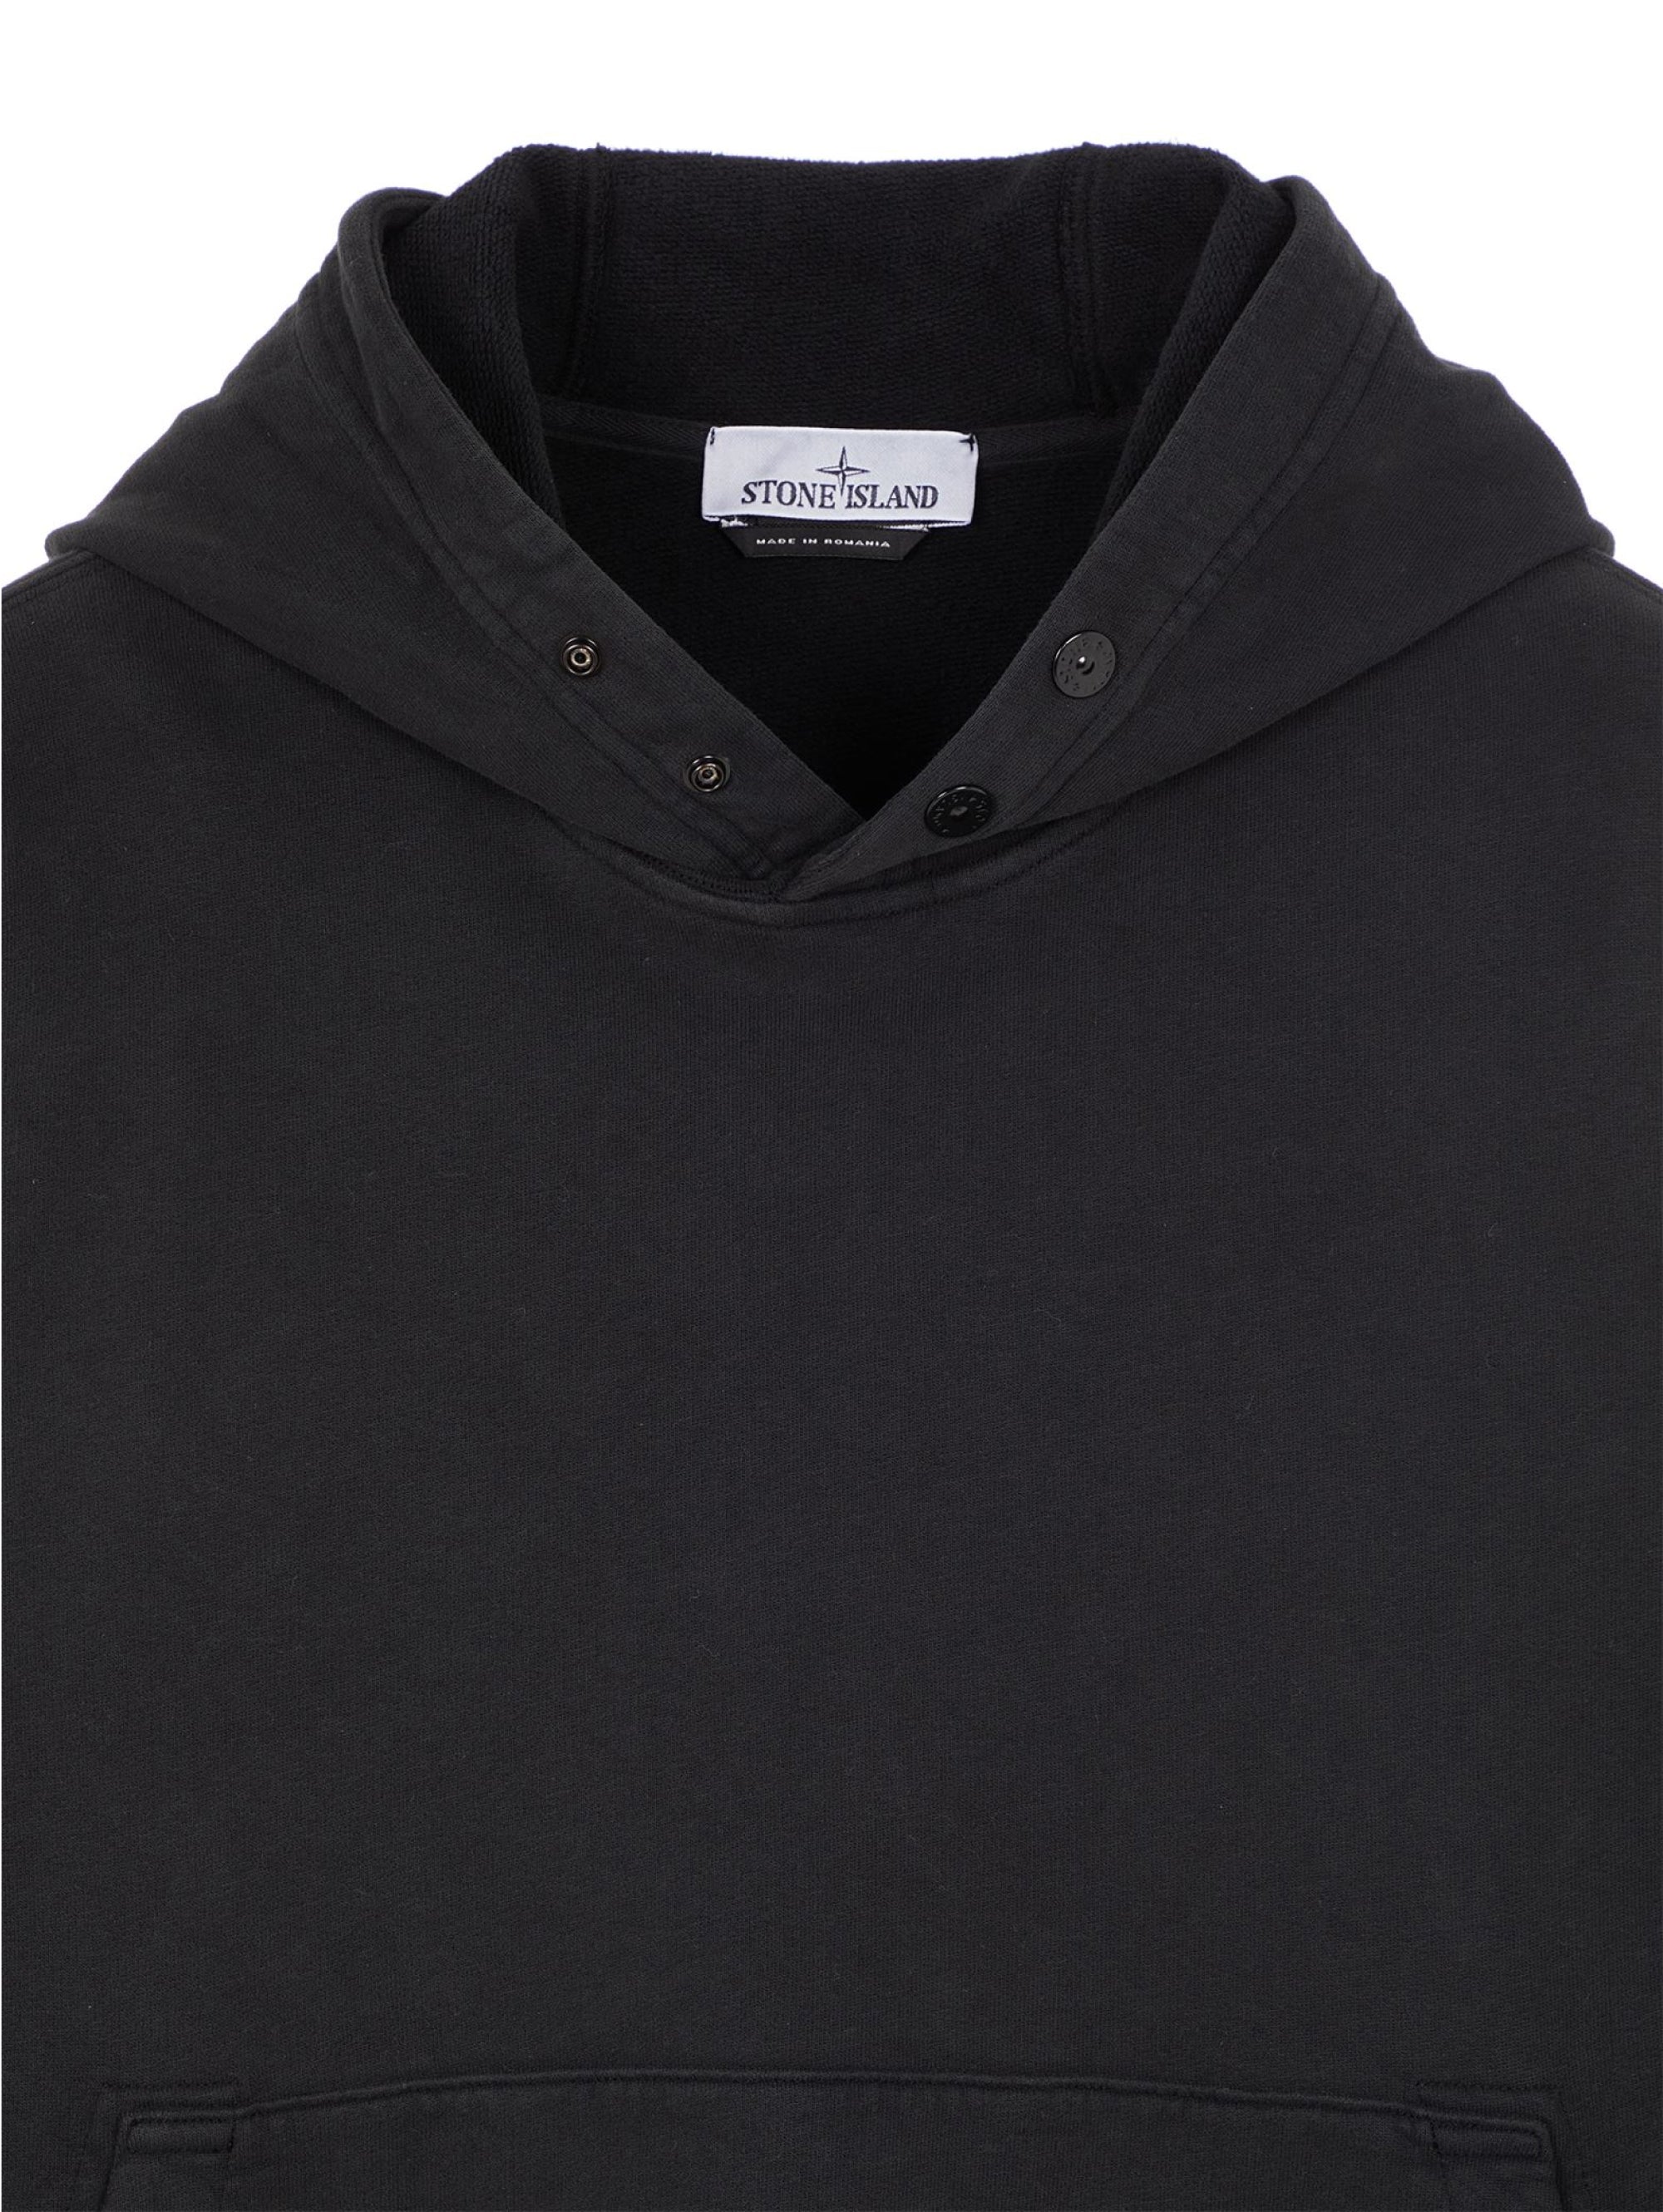 Sweatshirt with Hood and Pouch Pocket in Black